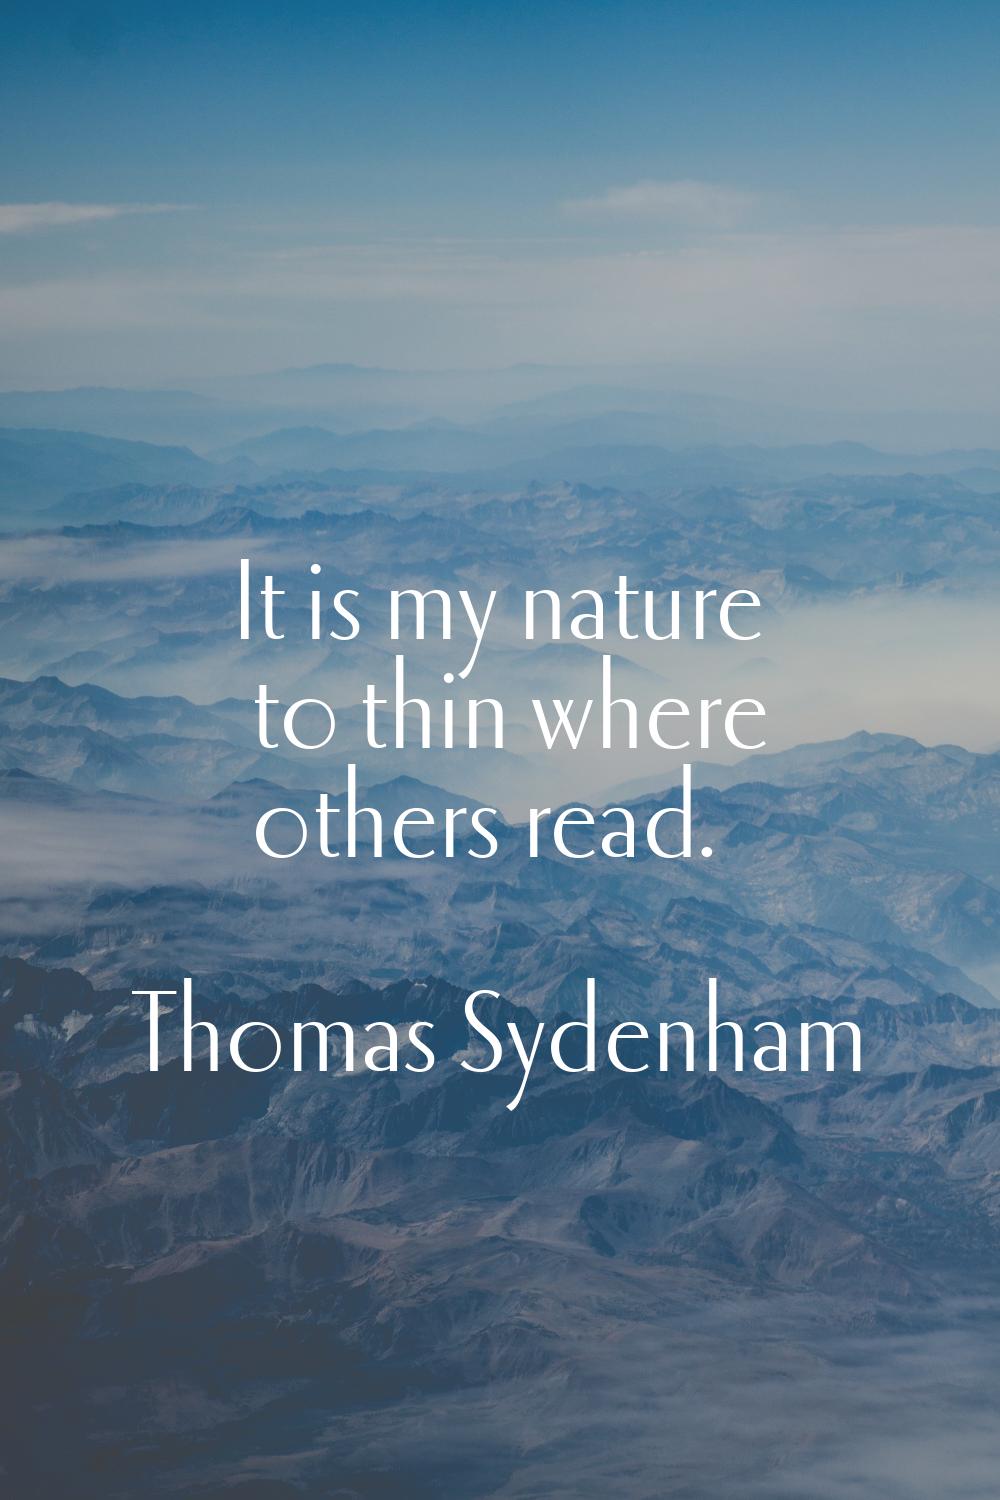 It is my nature to thin where others read.